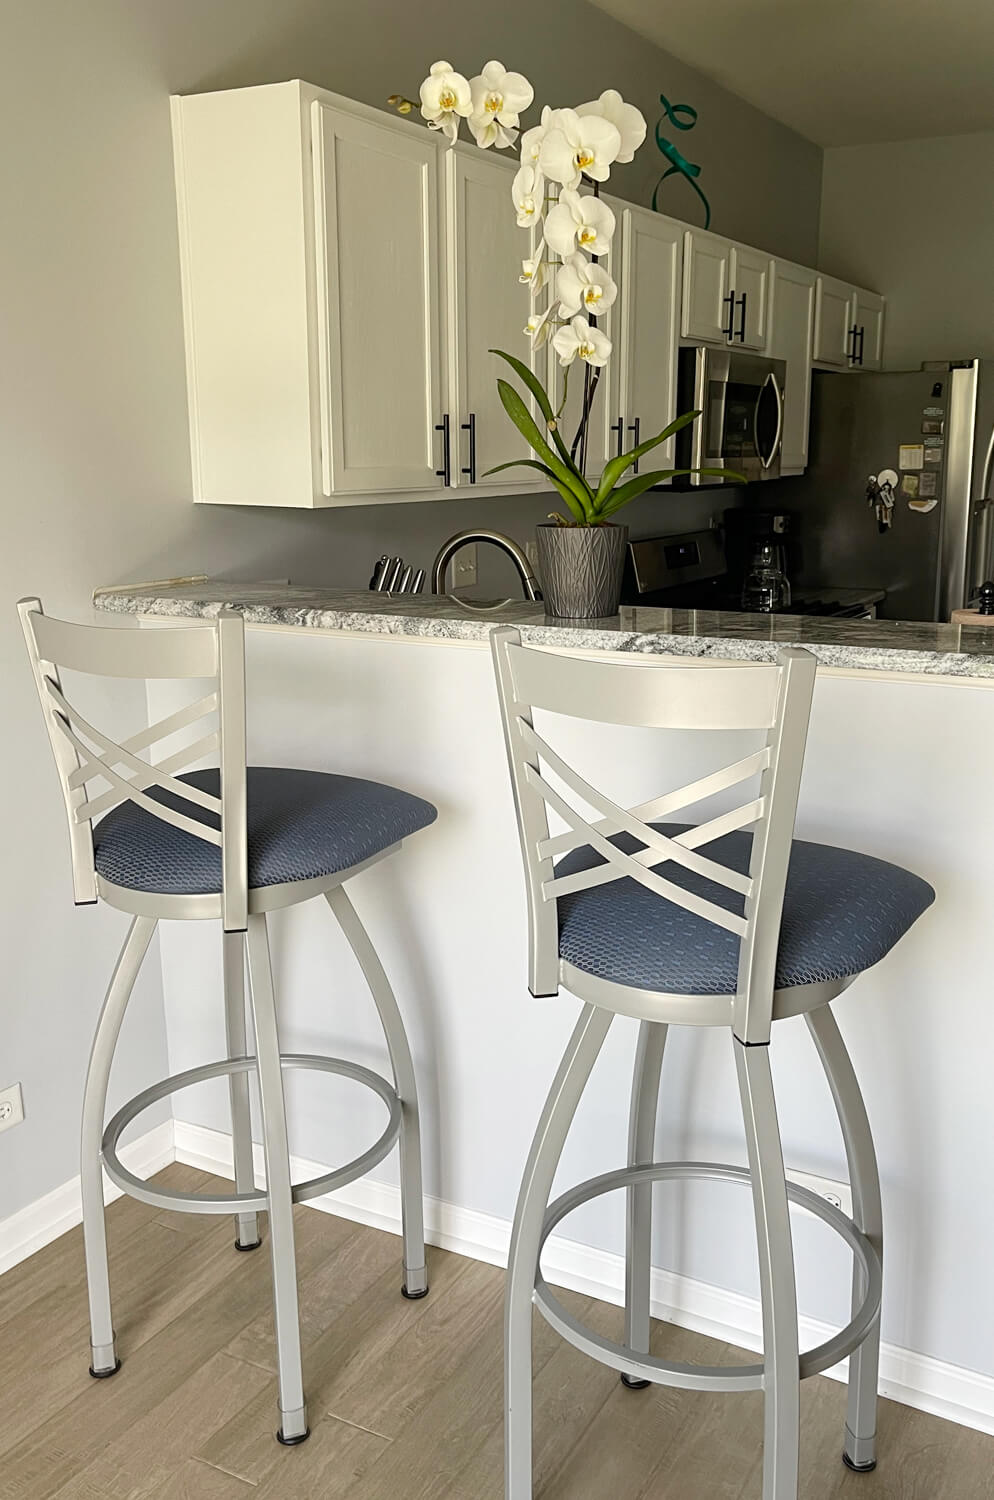 Holland's Catalina 820 XL Silver Metal Swivel Bar Stool with Low Back in Customer's Kitchen